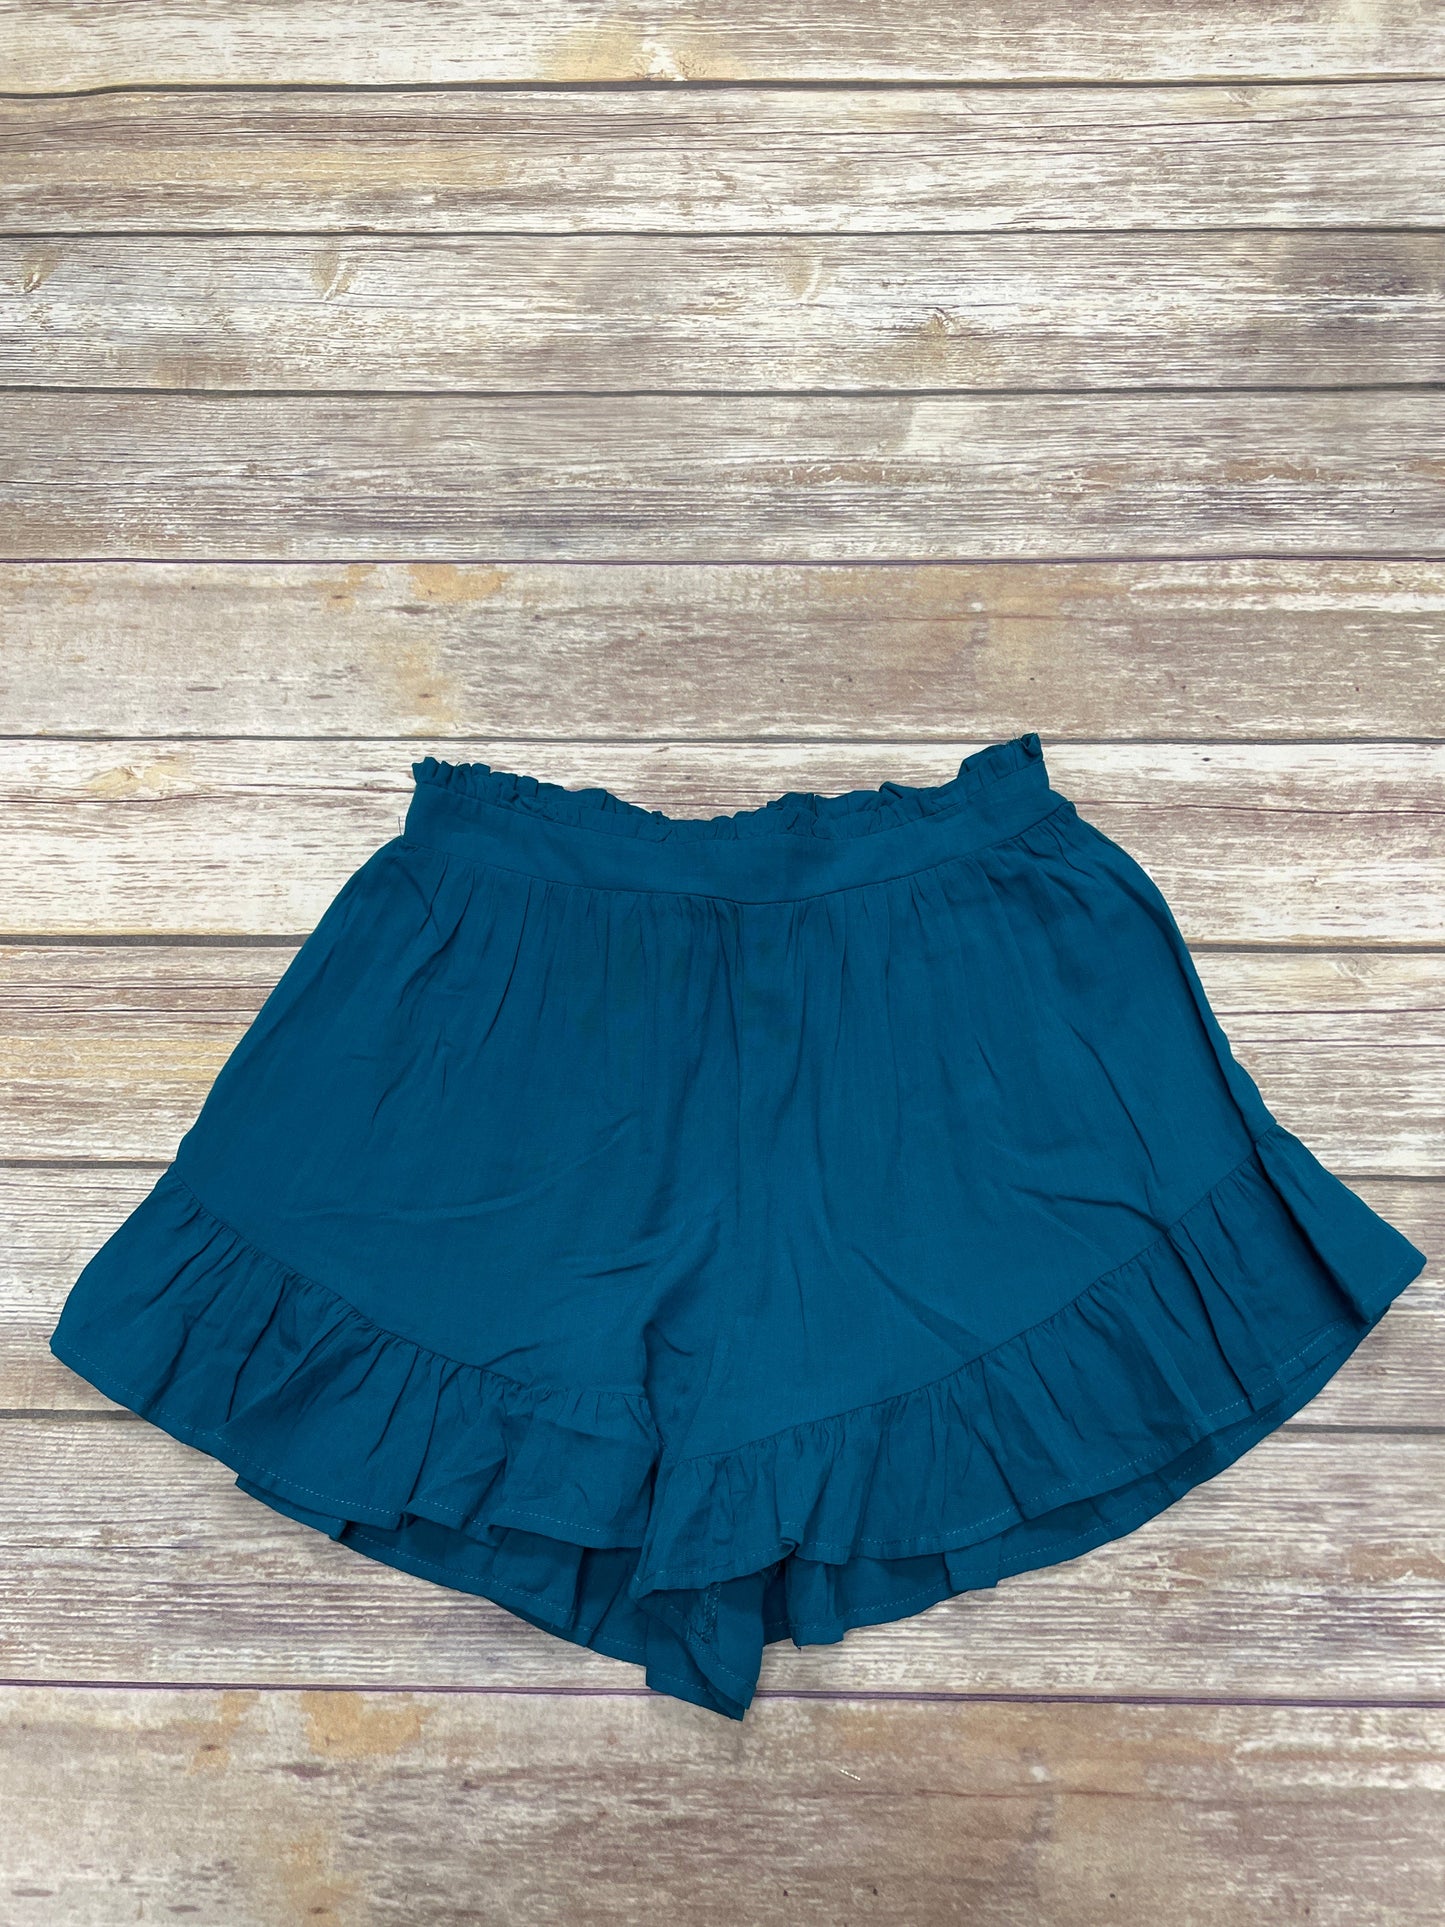 Teal Shorts Wild Fable, Size S